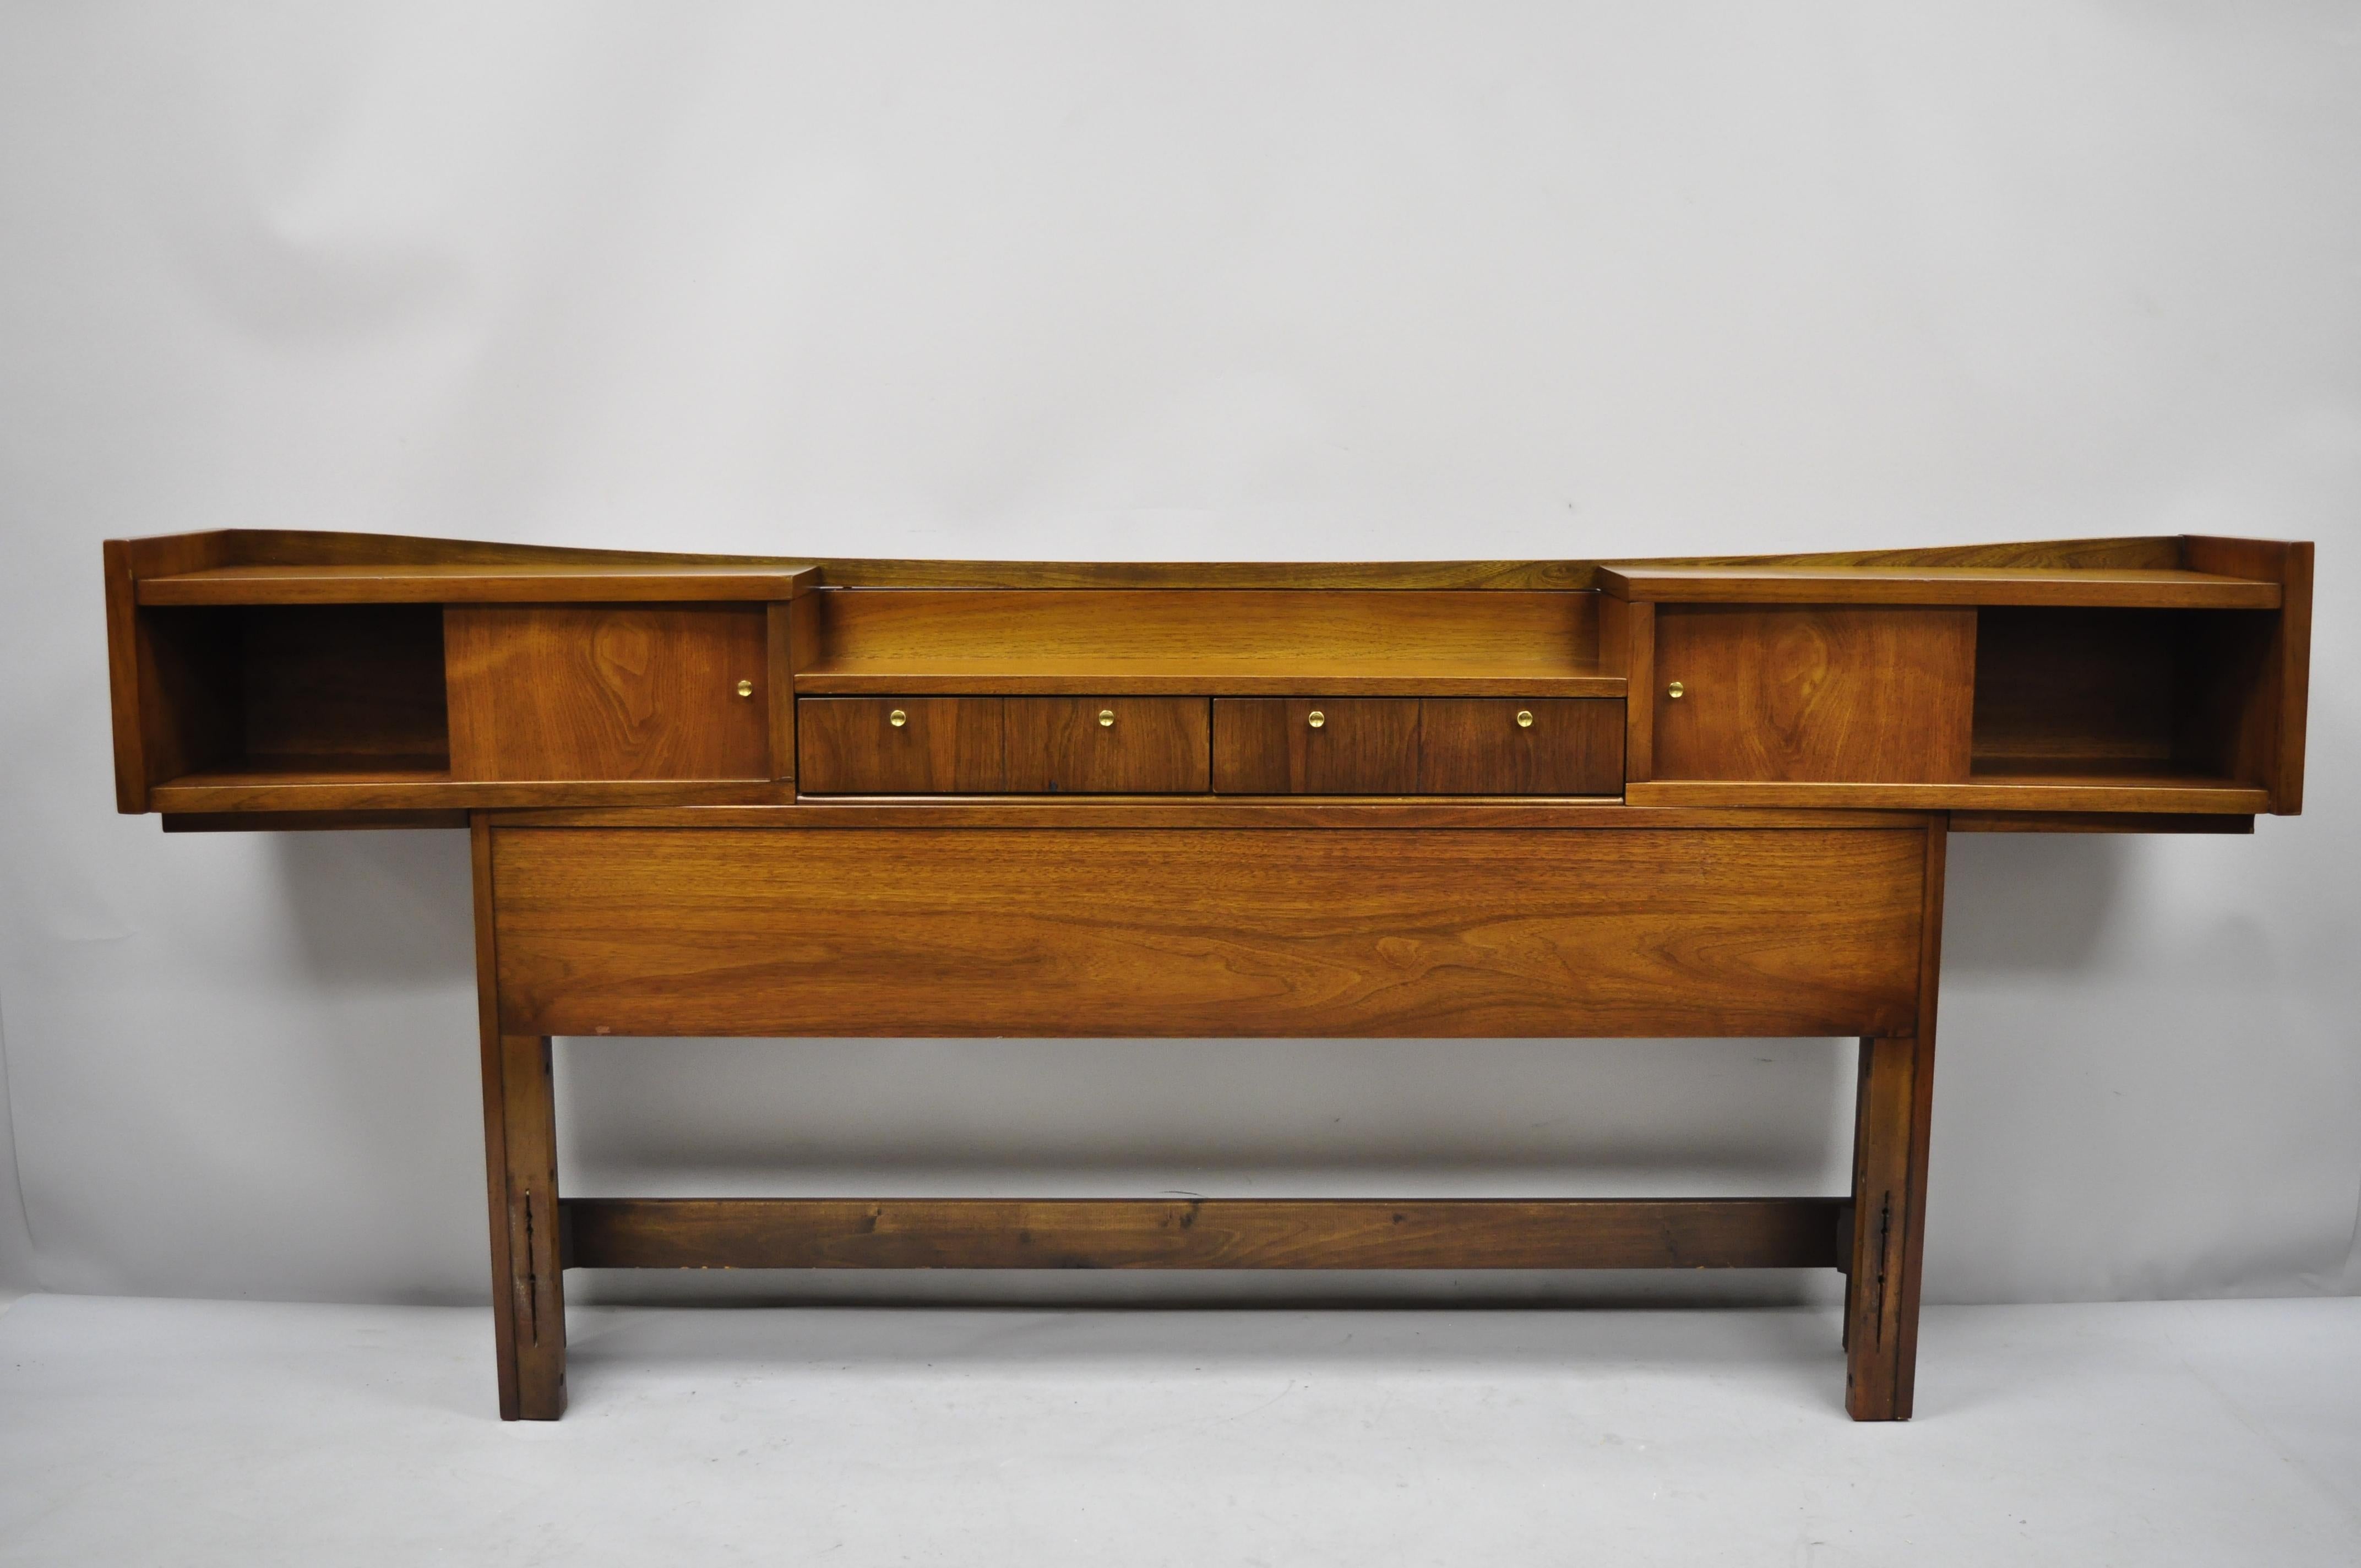 Vintage Mid-Century Modern walnut full size storage bookcase bed headboard. Item features sliding doors, bookcase shelves, floating design, beautiful wood grain, 2 dovetailed drawers, very nice vintage item, sleek sculptural form, circa mid-20th